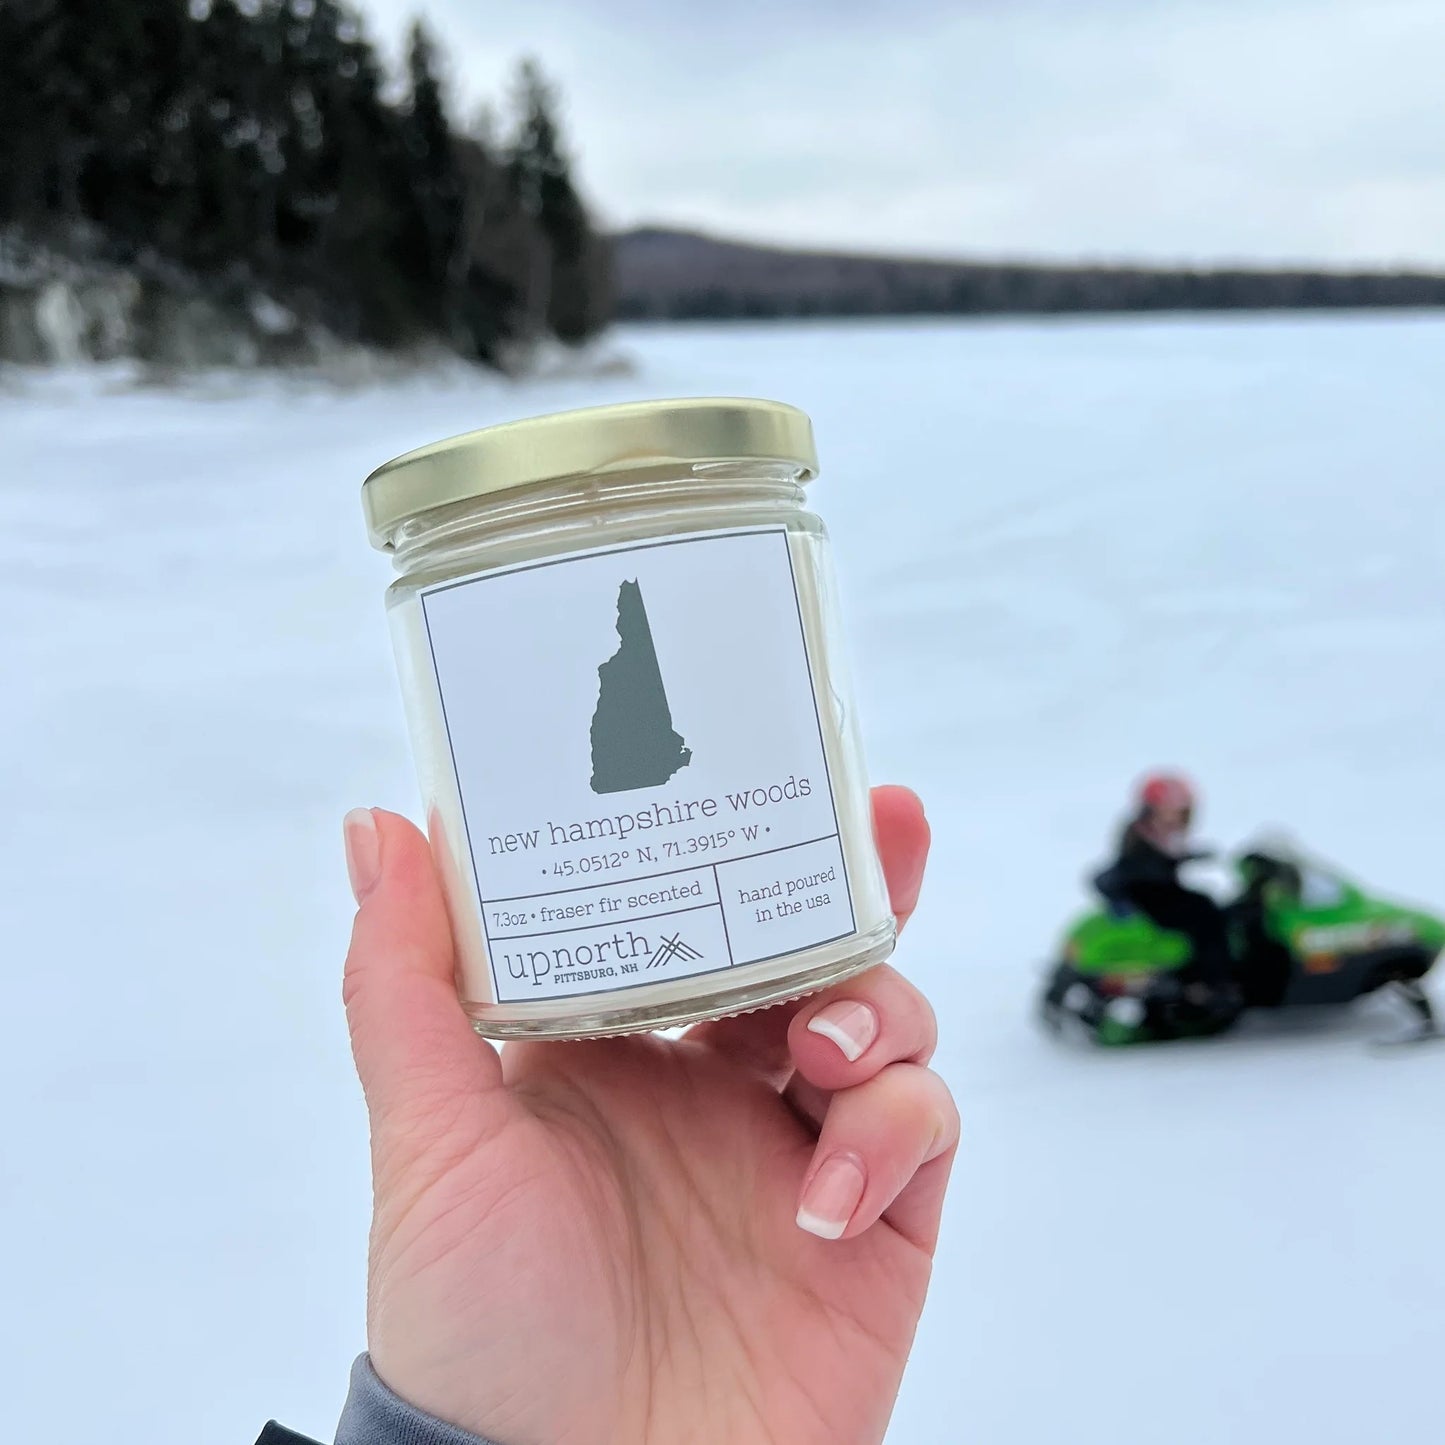 New Hampshire Woods Candle